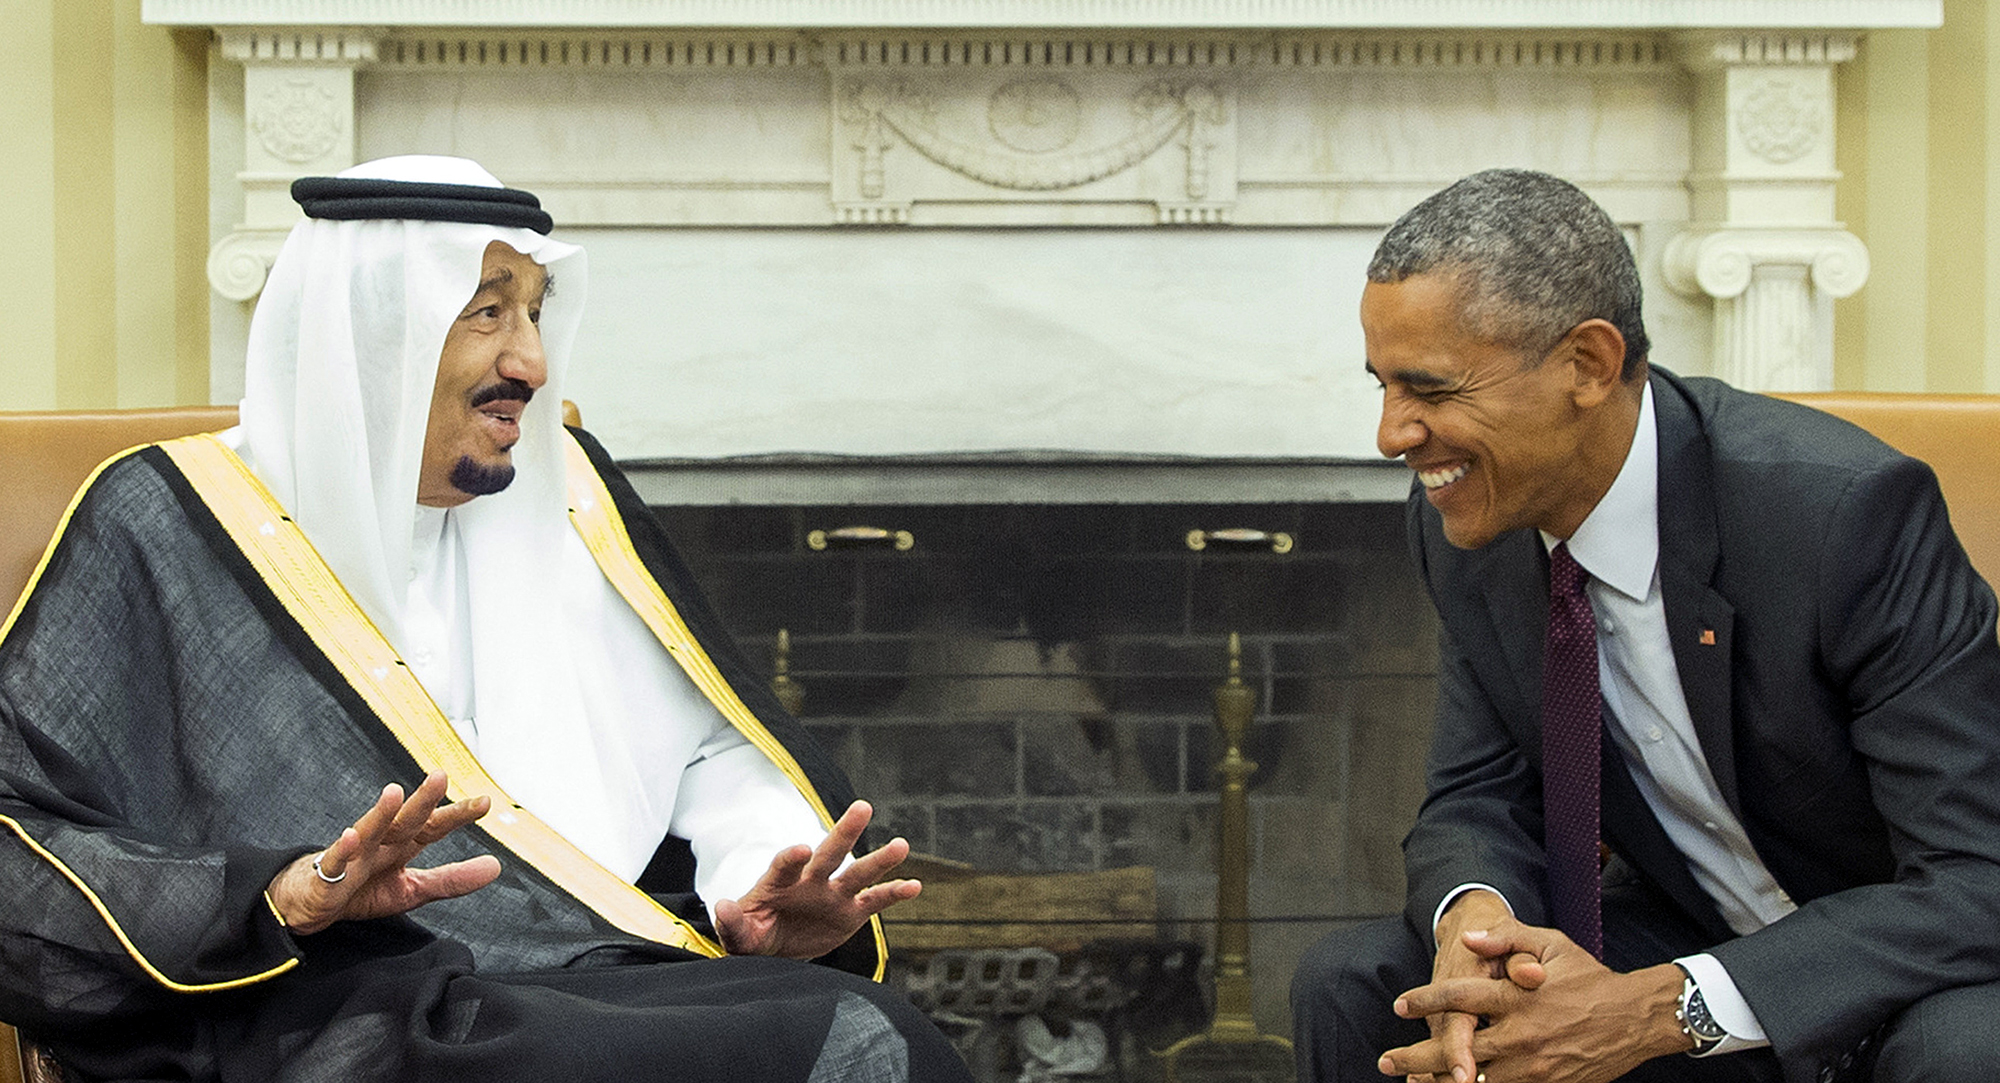 President Barack Obama, right, meets with King Salman of Saudi Arabia in the Oval Office of the White House, on Friday, Sept. 4, 2015, in Washington. The meeting comes as Saudi Arabia seeks assurances from the U.S. that the Iran nuclear deal comes with the necessary resources to help check Iran’s regional ambitions.   (AP Photo/Evan Vucci)